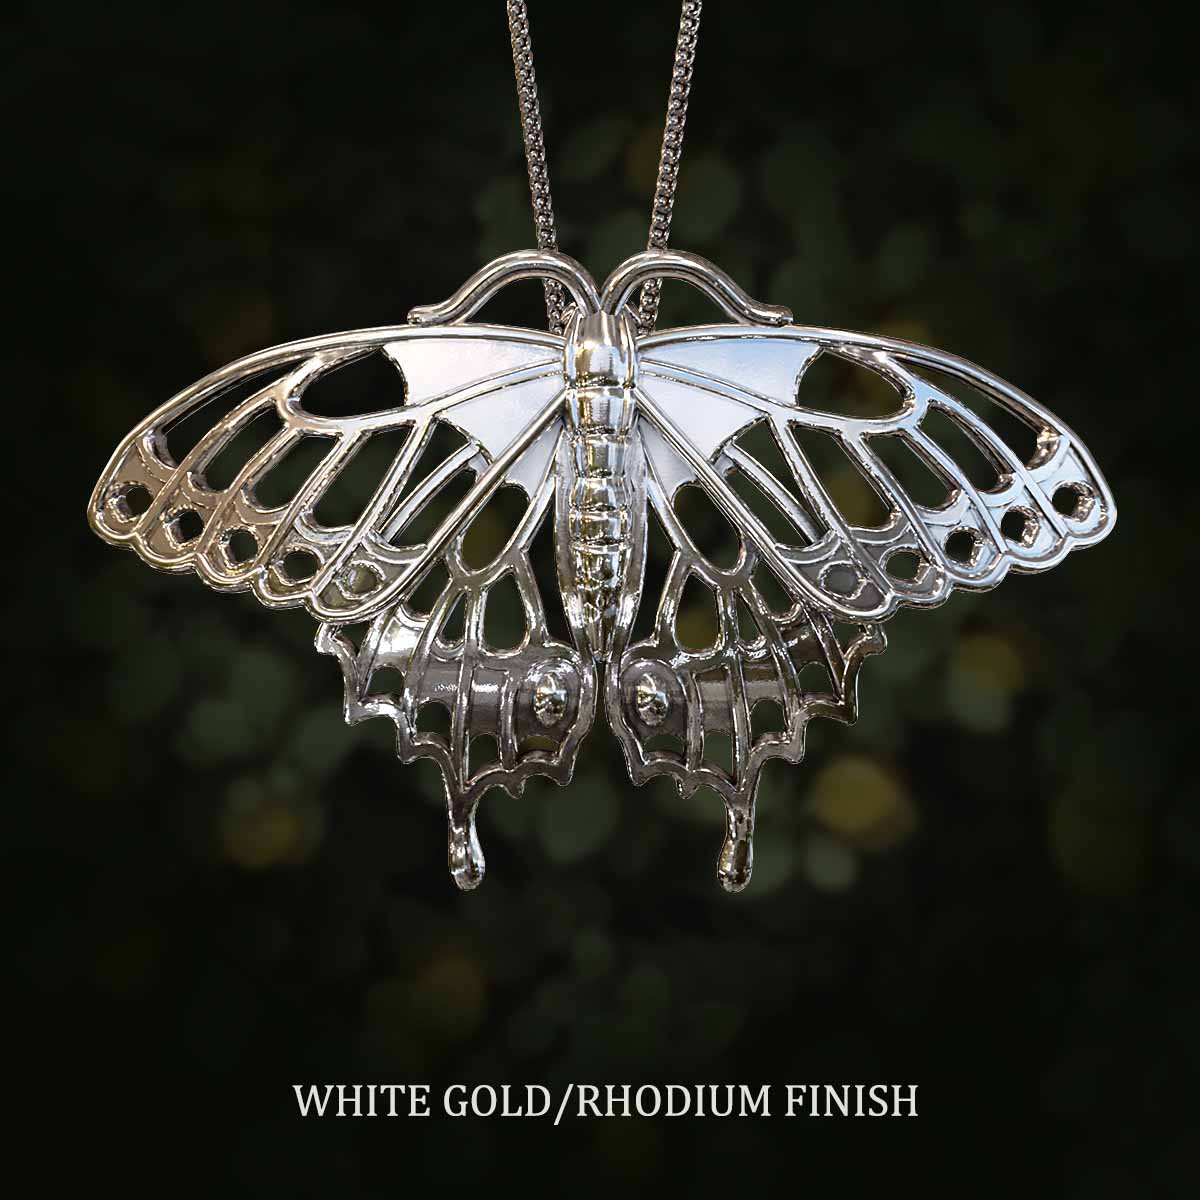     White-Gold-Rhodium-Finish-Swallowtail-Butterfly-Pendant-Jewelry-For-Necklace